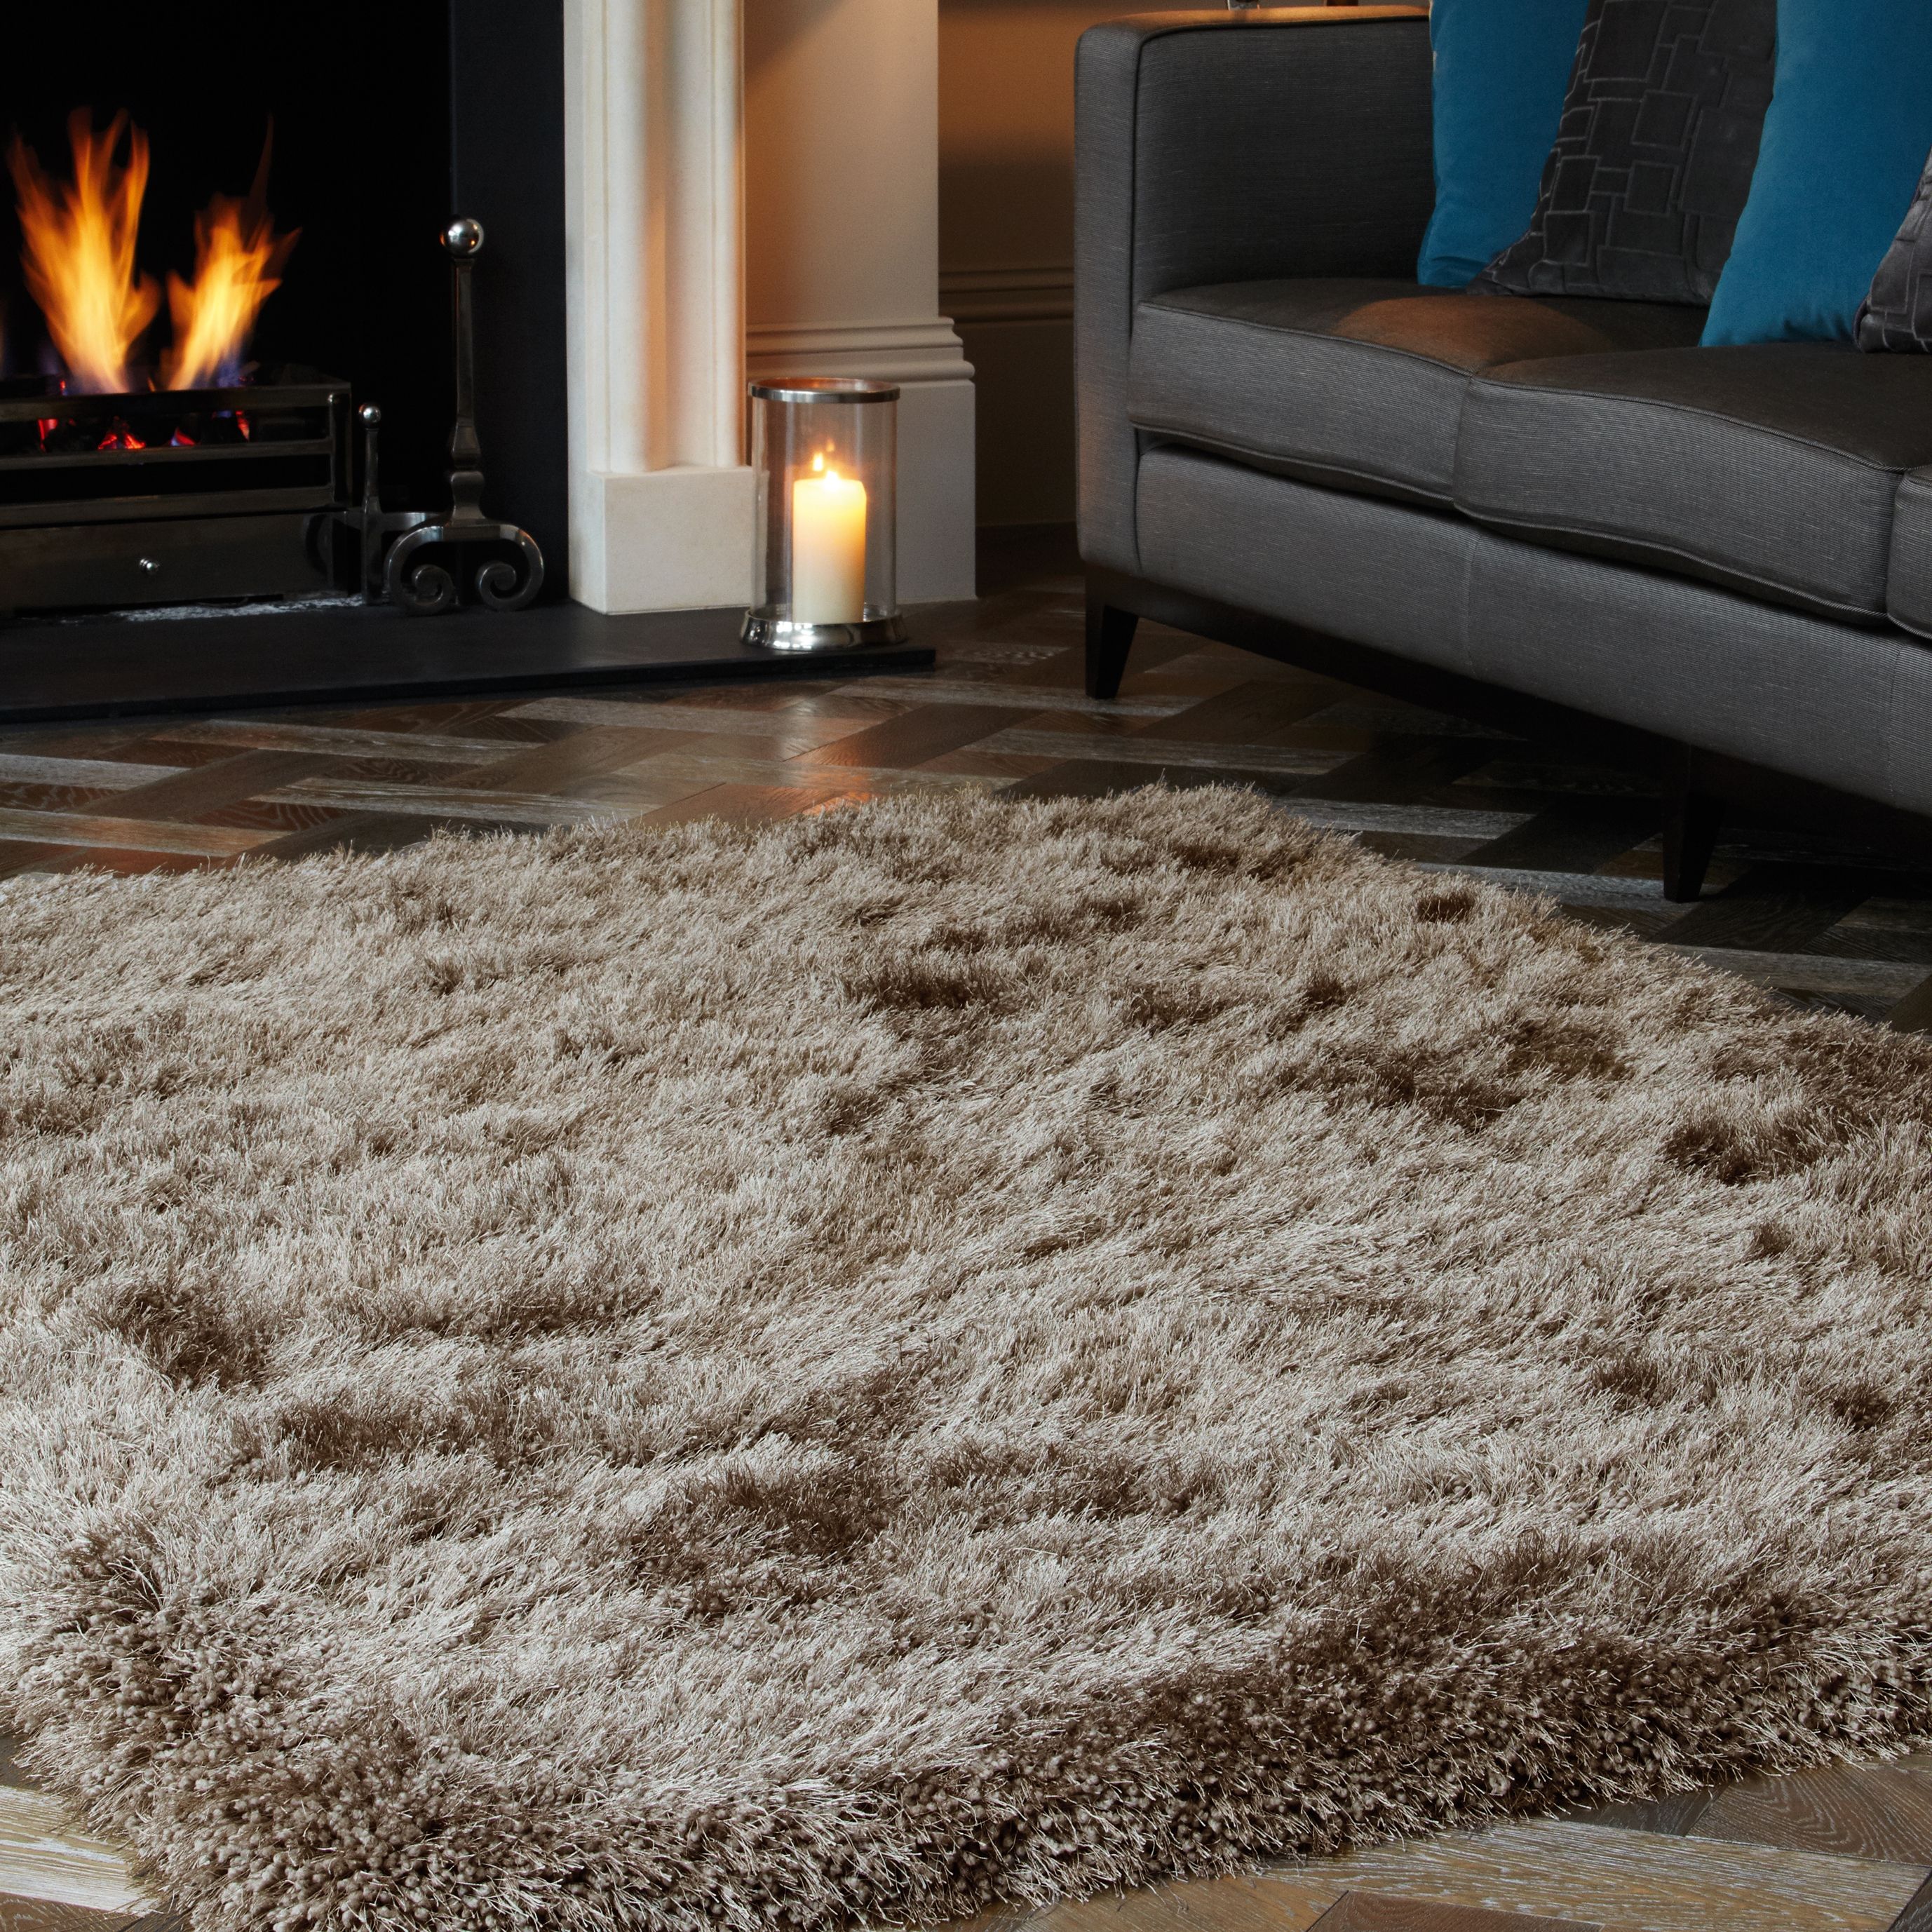 Shaggy Rugs 1000s Of Styles With Free Delivery At The Rug Seller Within Shaggy Rugs (View 11 of 15)